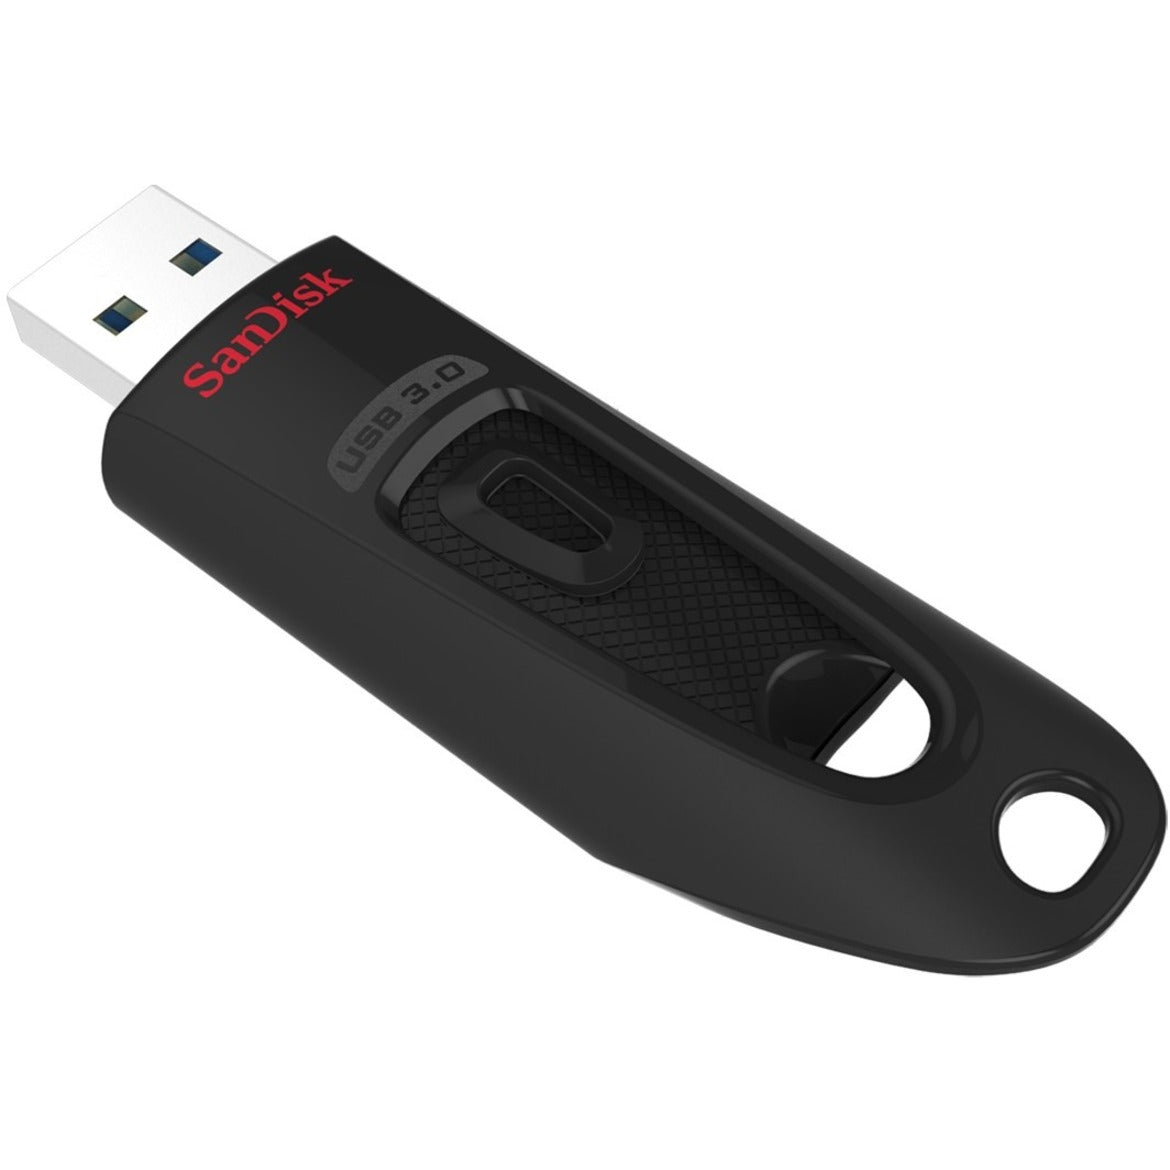 SanDisk SDCZ48-256G-A46 Ultra USB 3.0 Flash Drive - 256GB, High-Speed Data Transfer and Storage